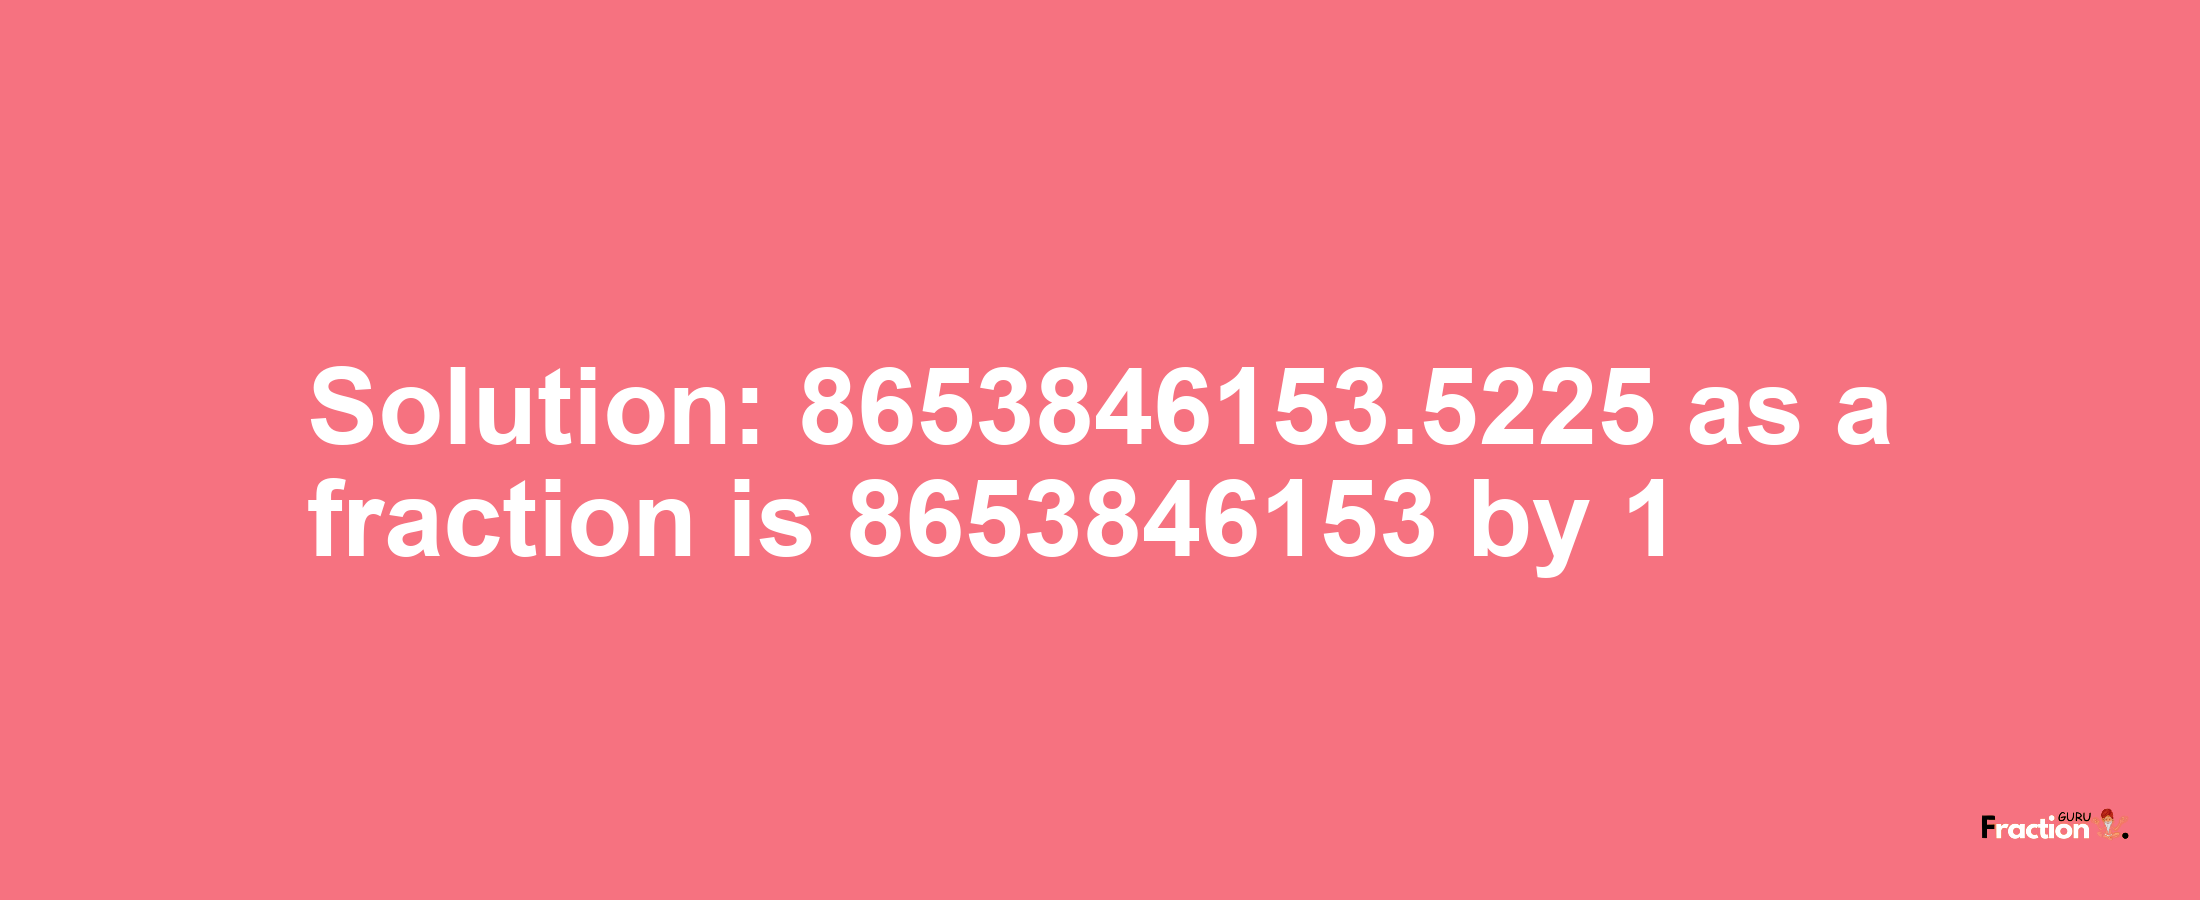 Solution:8653846153.5225 as a fraction is 8653846153/1